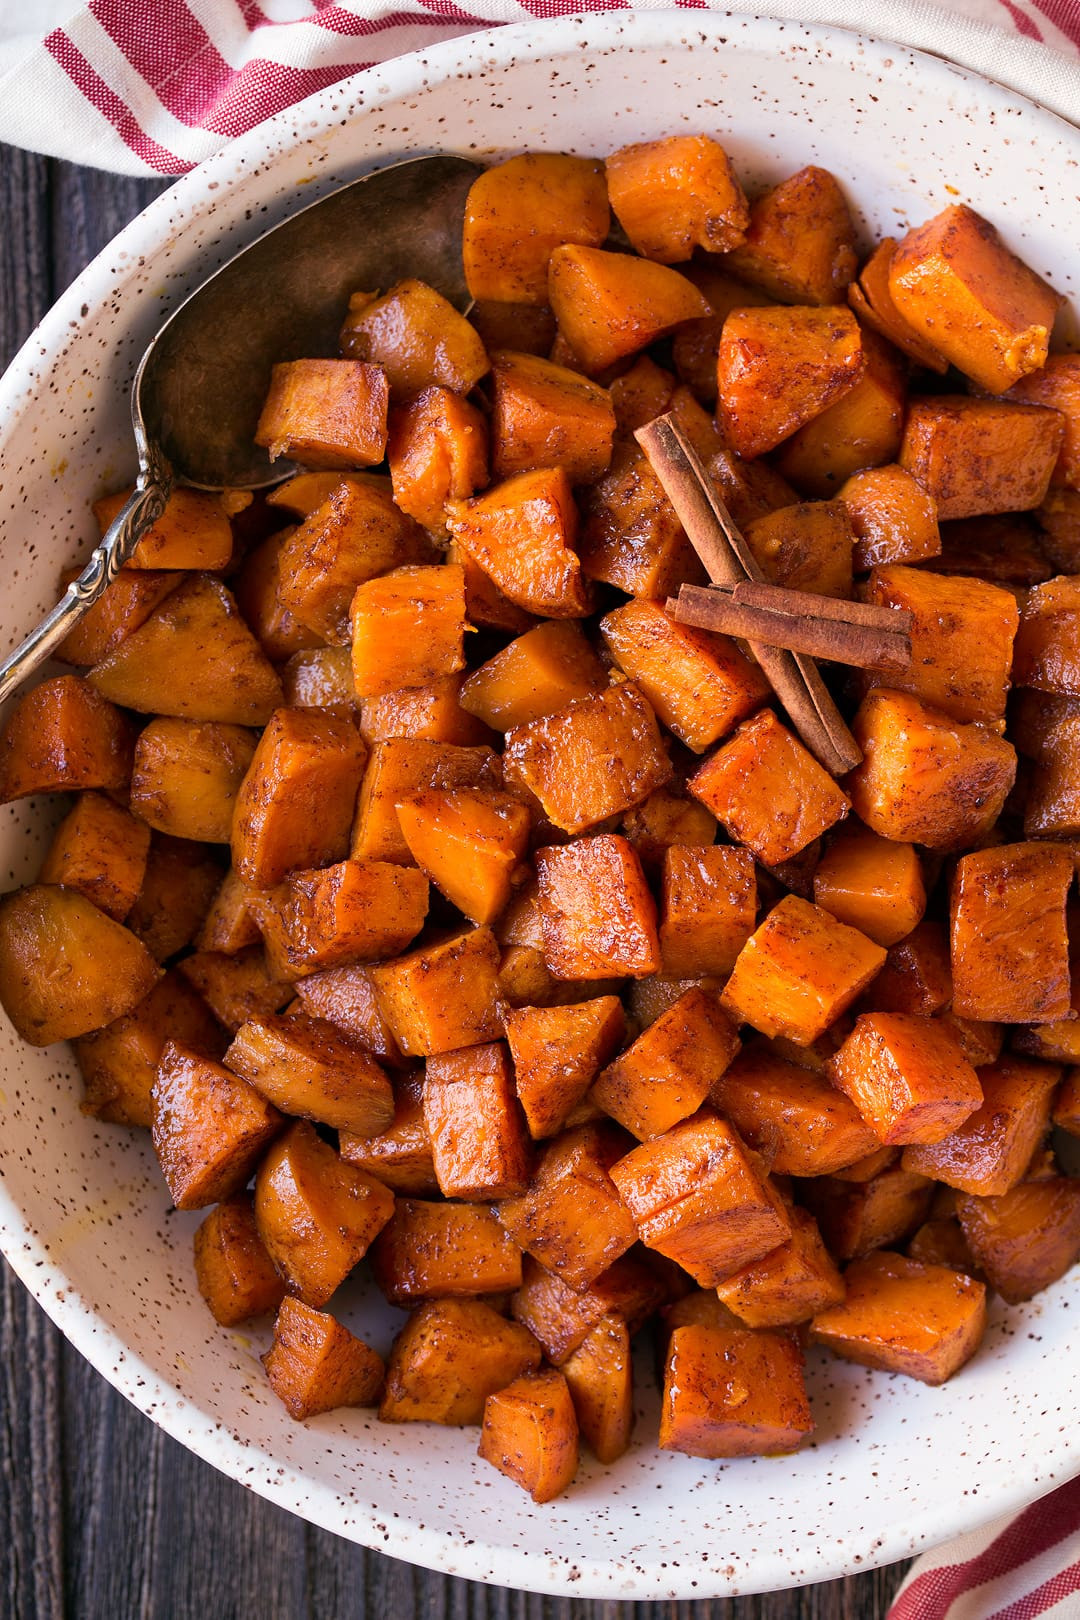 Roasted Sweet Potato Recipe
 Roasted Sweet Potatoes with Cinnamon and Honey Butter